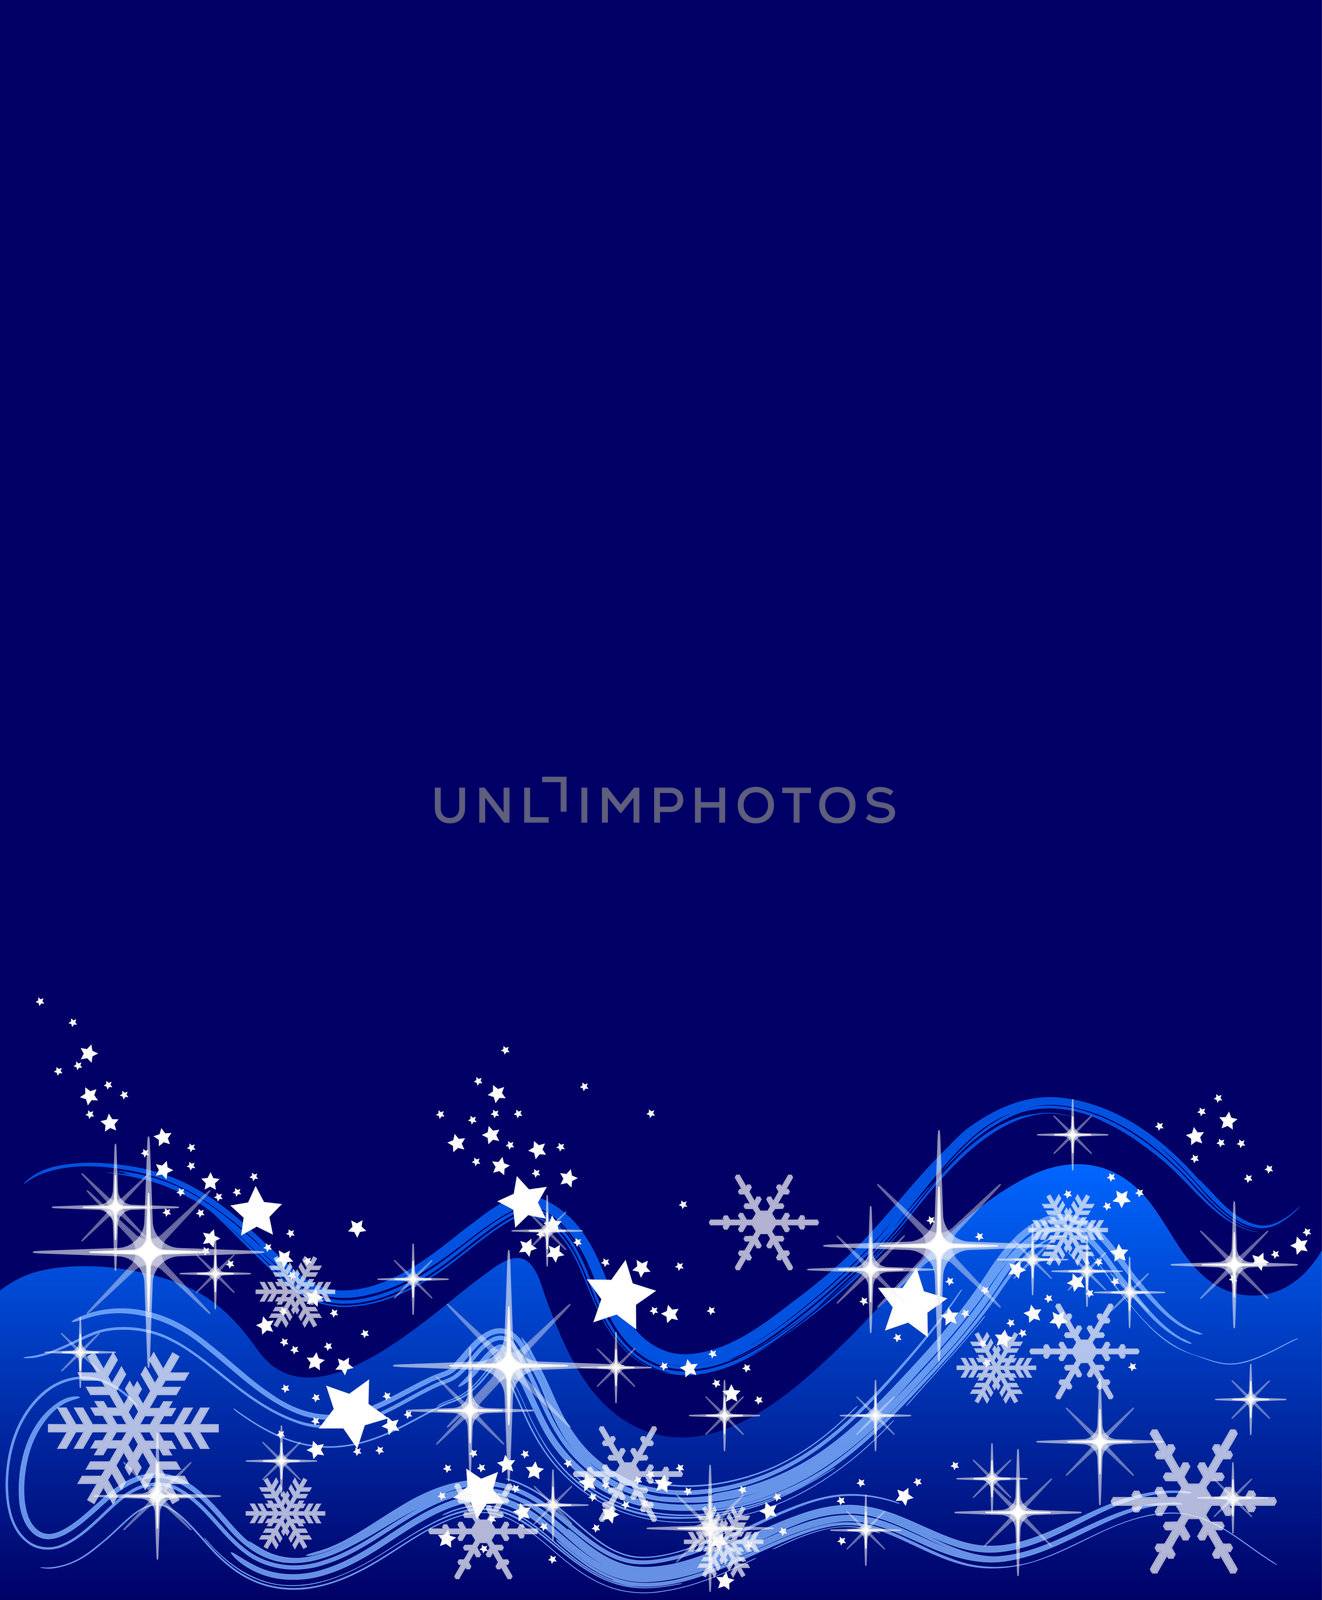 Illustration of a blue background with stars and snowflakes by peromarketing